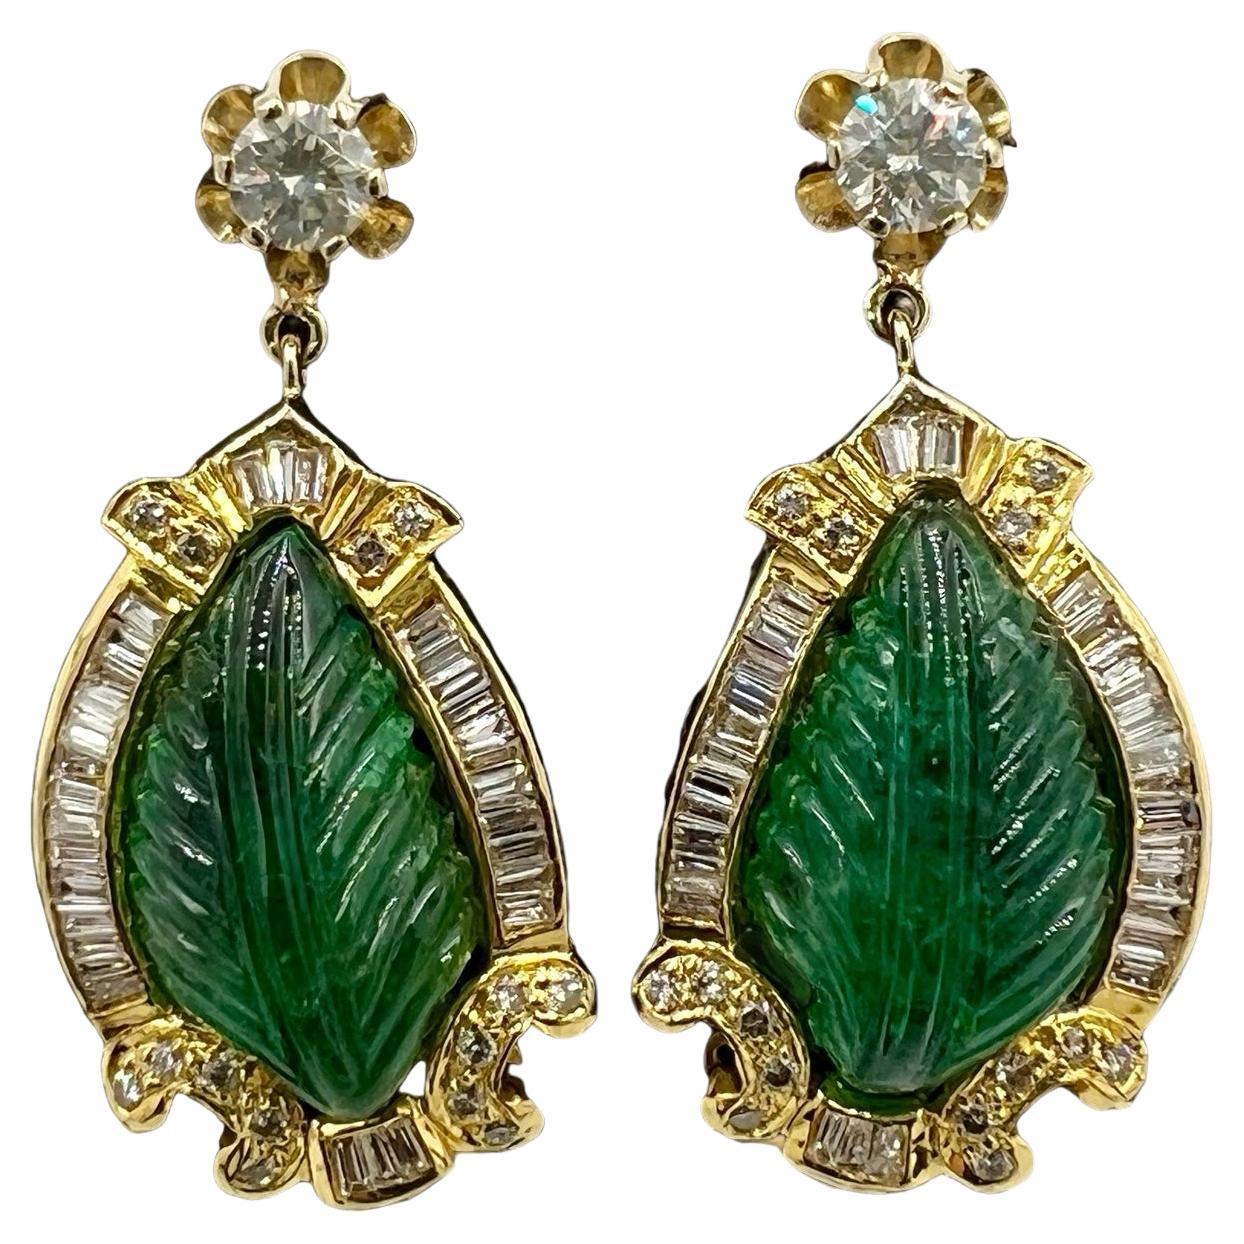 Vintage Carved Emerald Diamond Gold Earrings